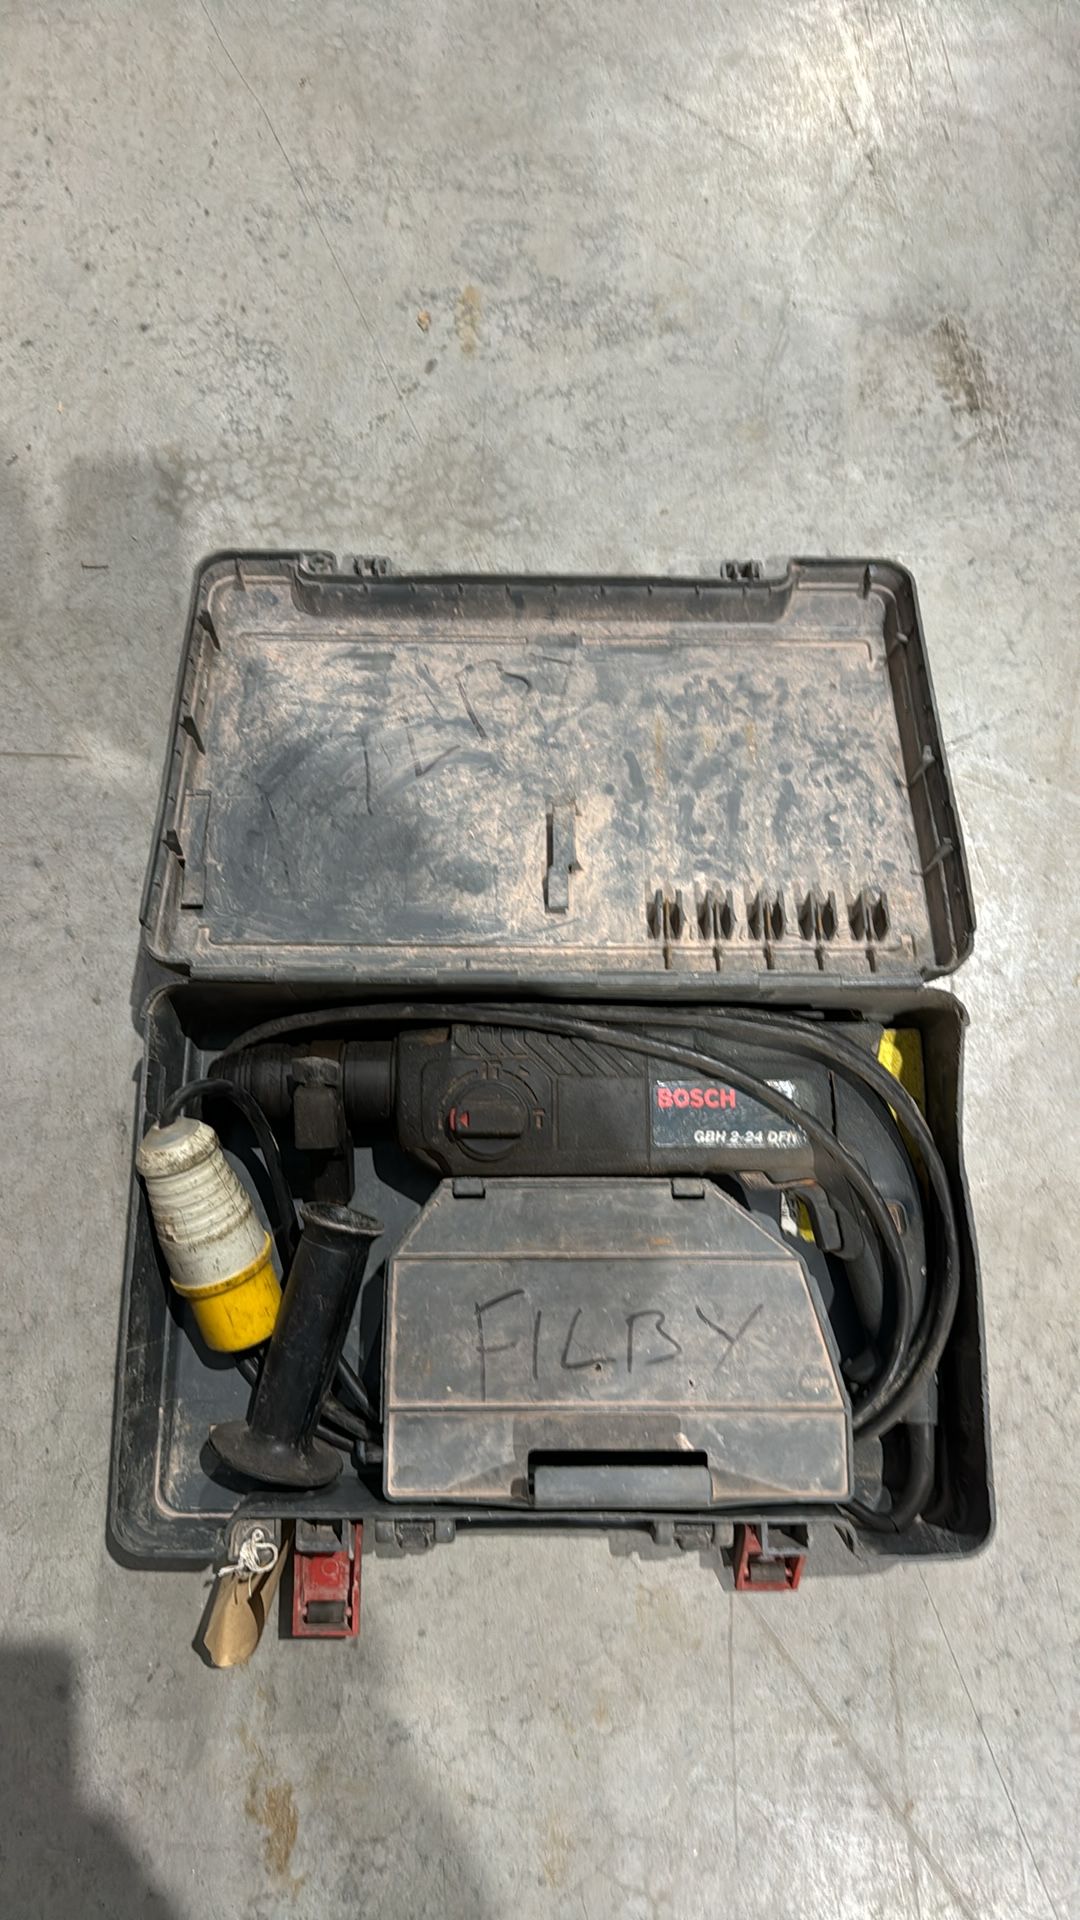 BOSCH GBH - 2-24 DFR Impact Drill / Driver - NO RESERVE - Image 2 of 3